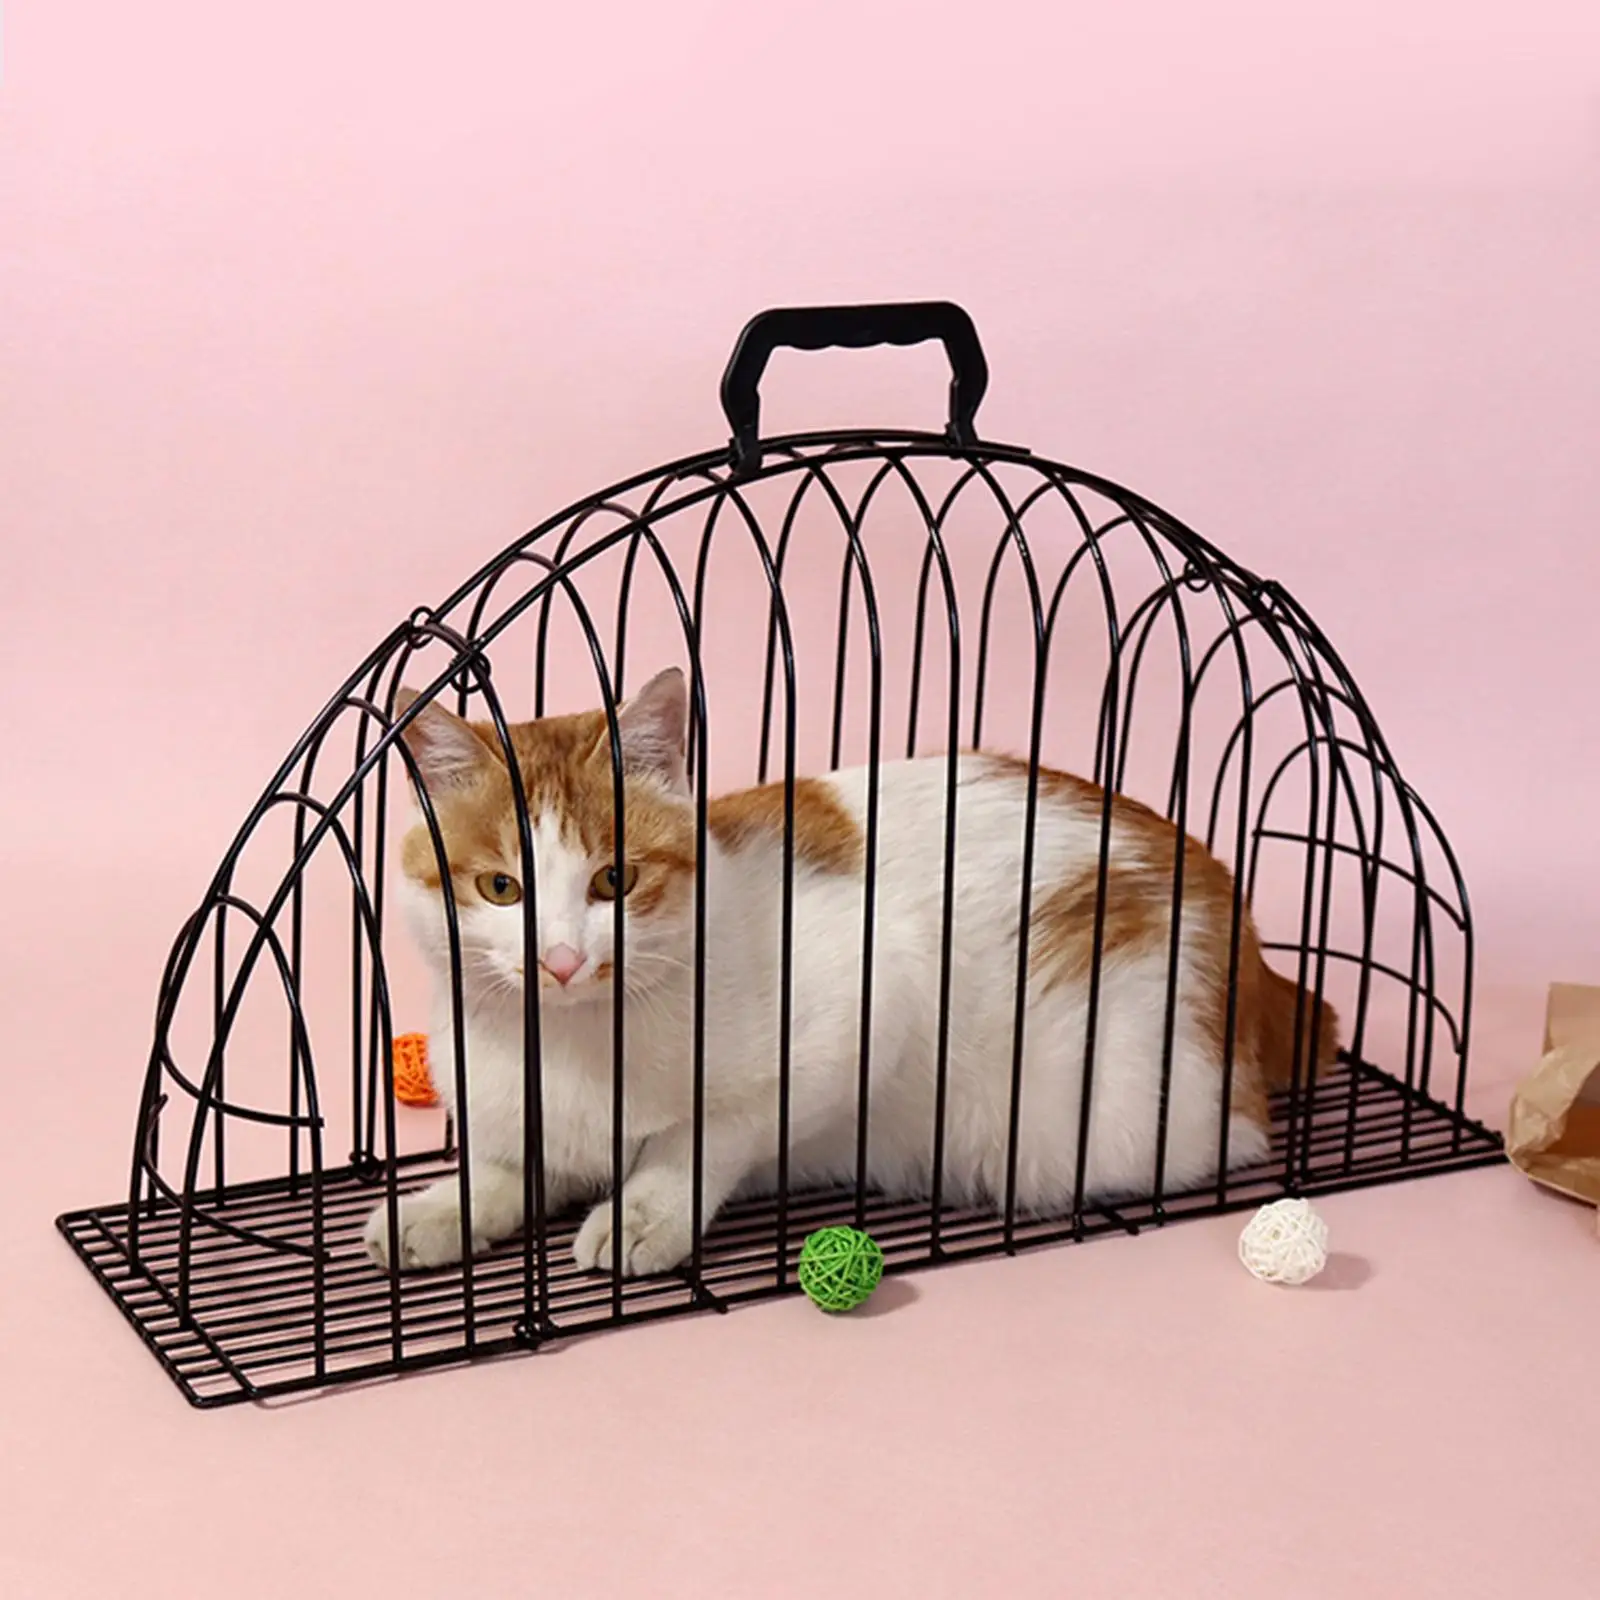 Portable Cats Dogs Dryer Cage Travel Bags Anti Grab Protector Shower Pet Drying Box for Kitty Doggy Kitten Small Animals Rabbits